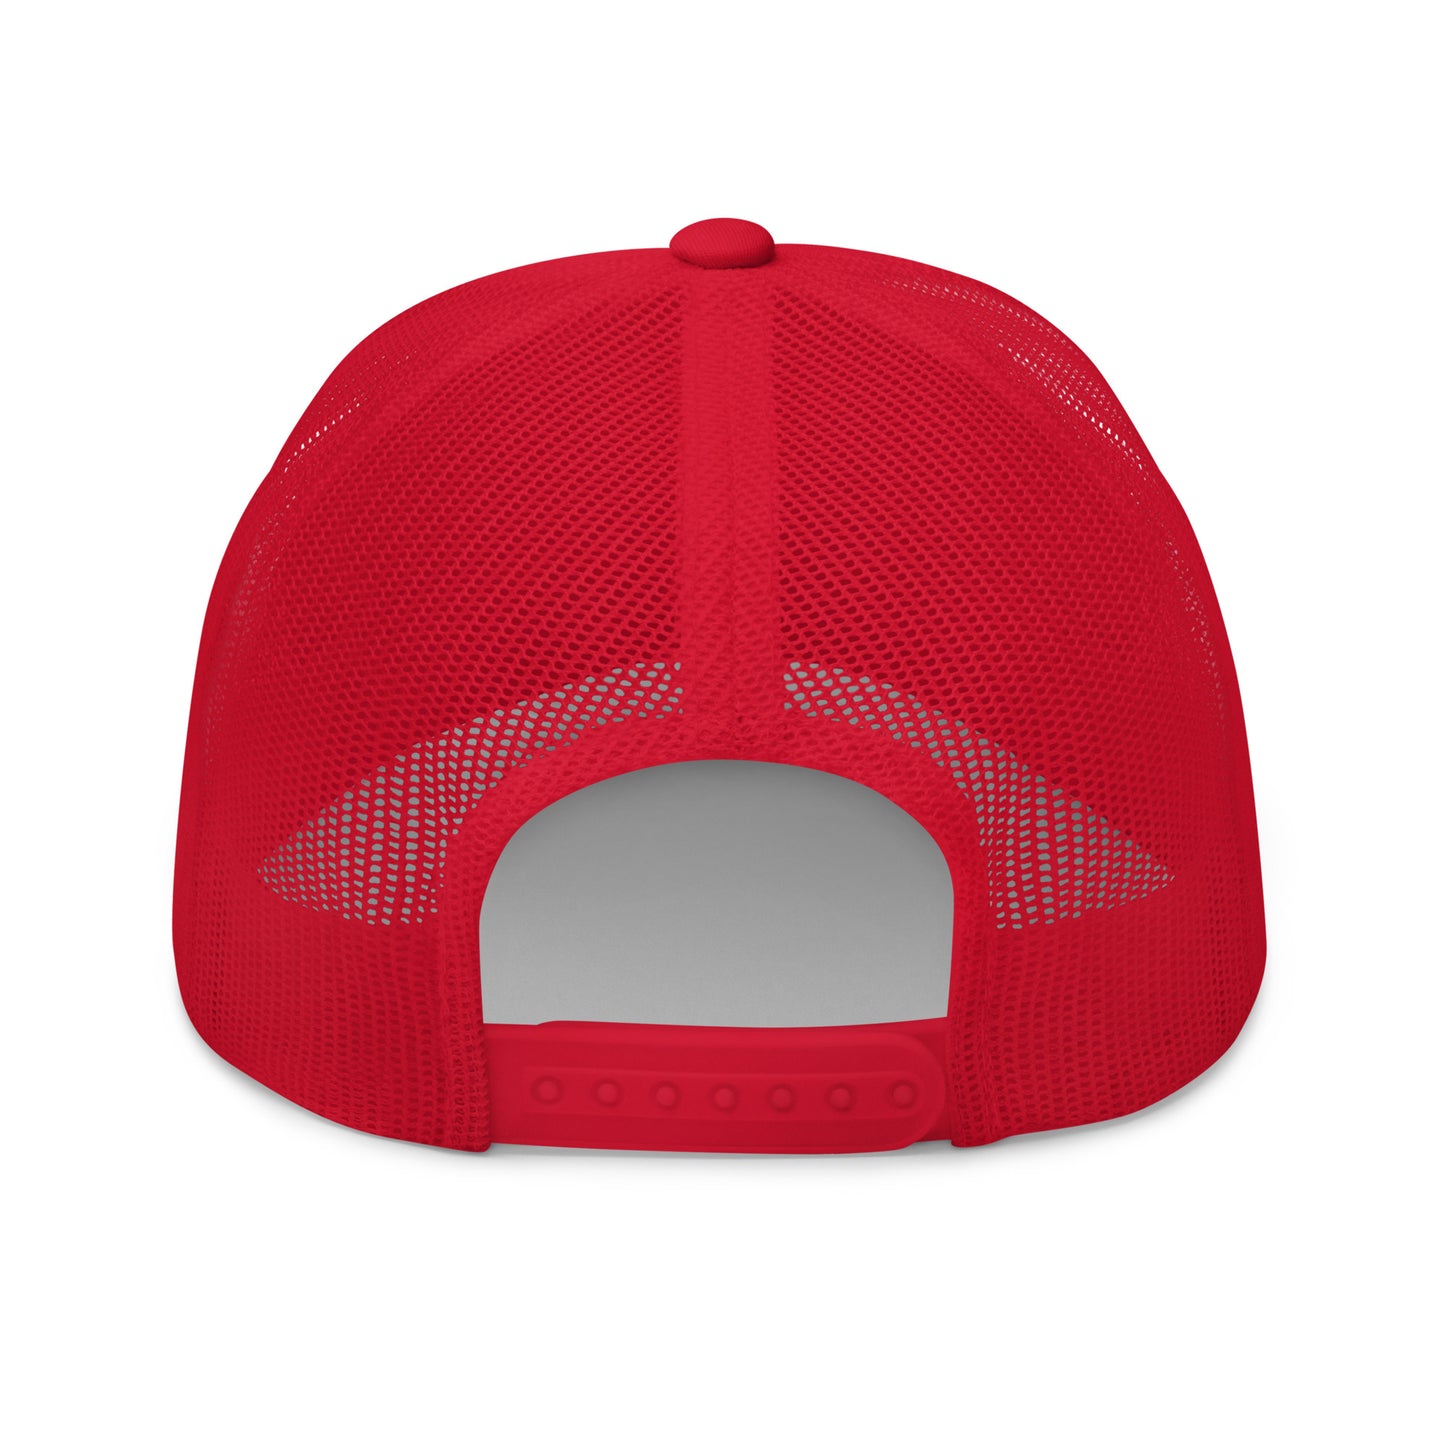 Maple Leaf Trucker Hat - Red/White • YUL Montreal • YHM Designs - Image 24